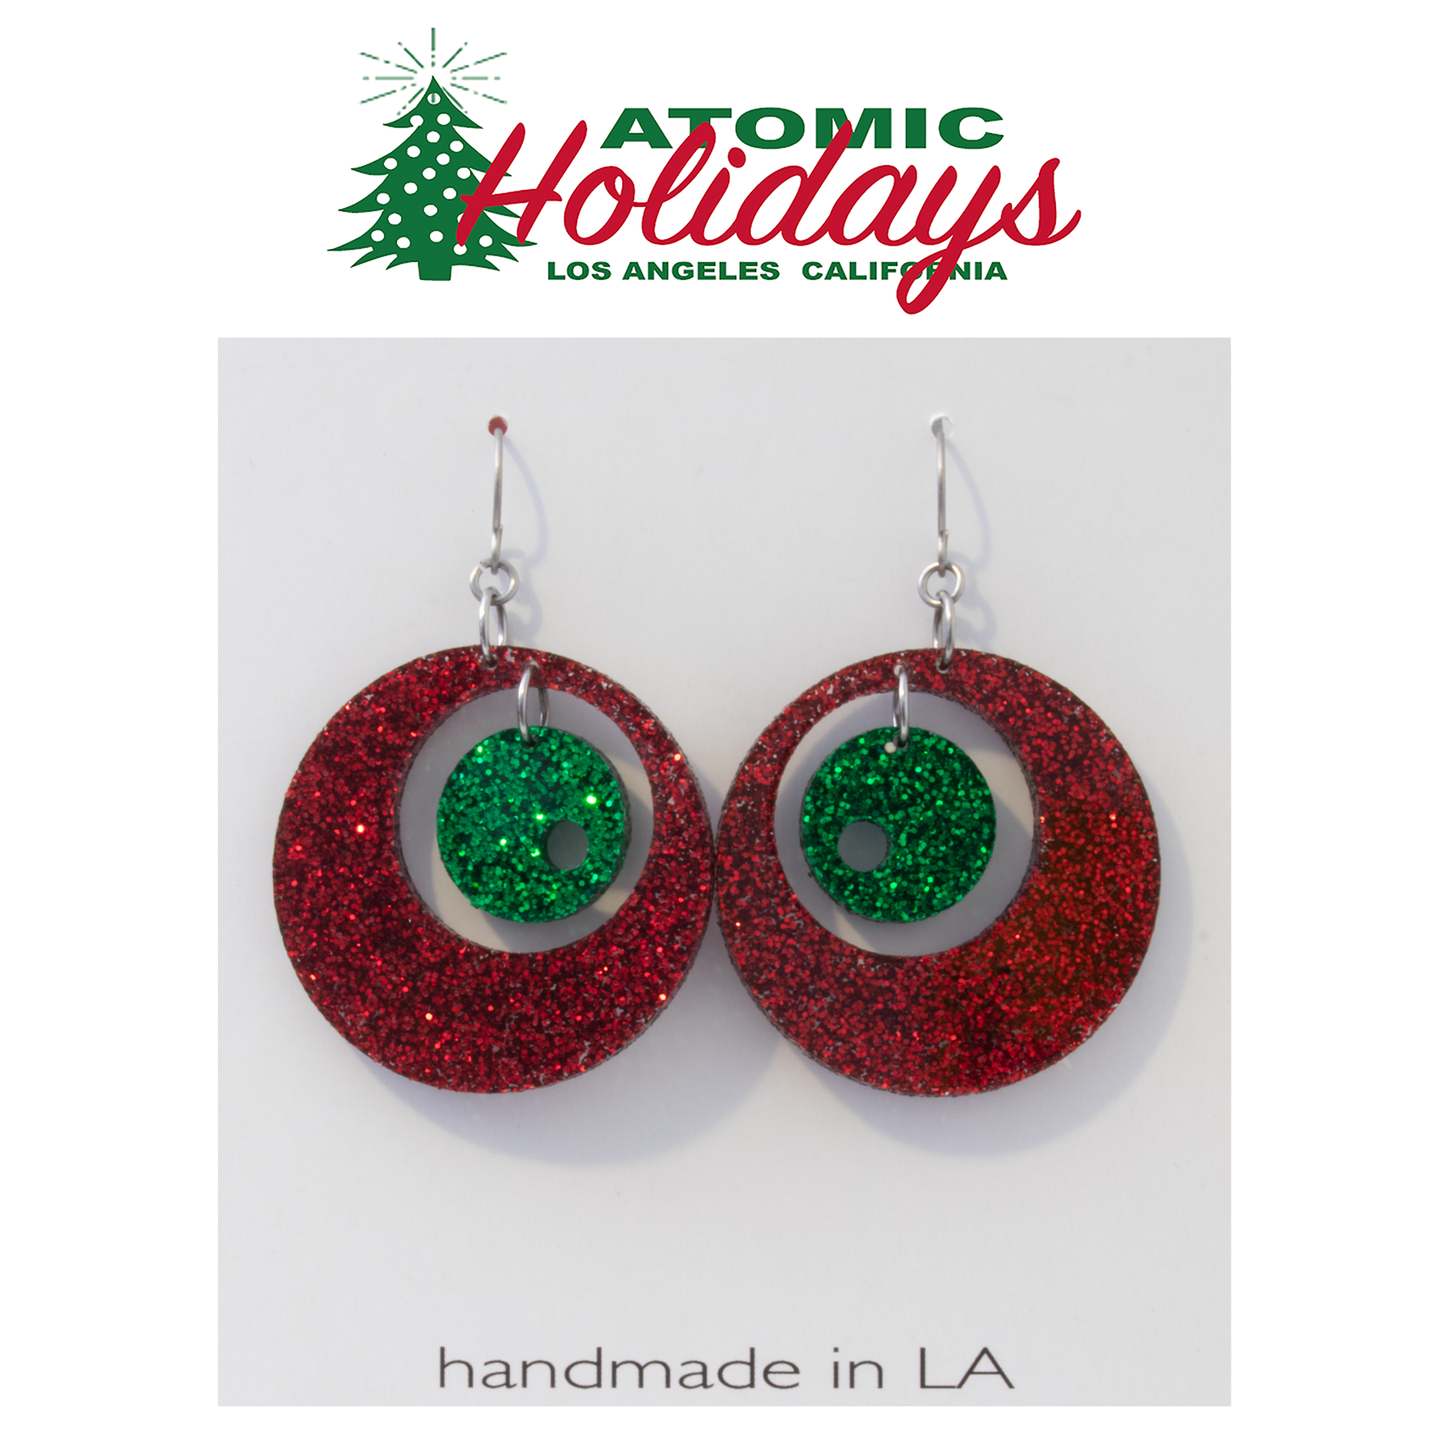 Atomic Holidays Statement Christmas Earrings in Glitter Red and Green - mid century modern groovy style by AtomicMobiles.com 